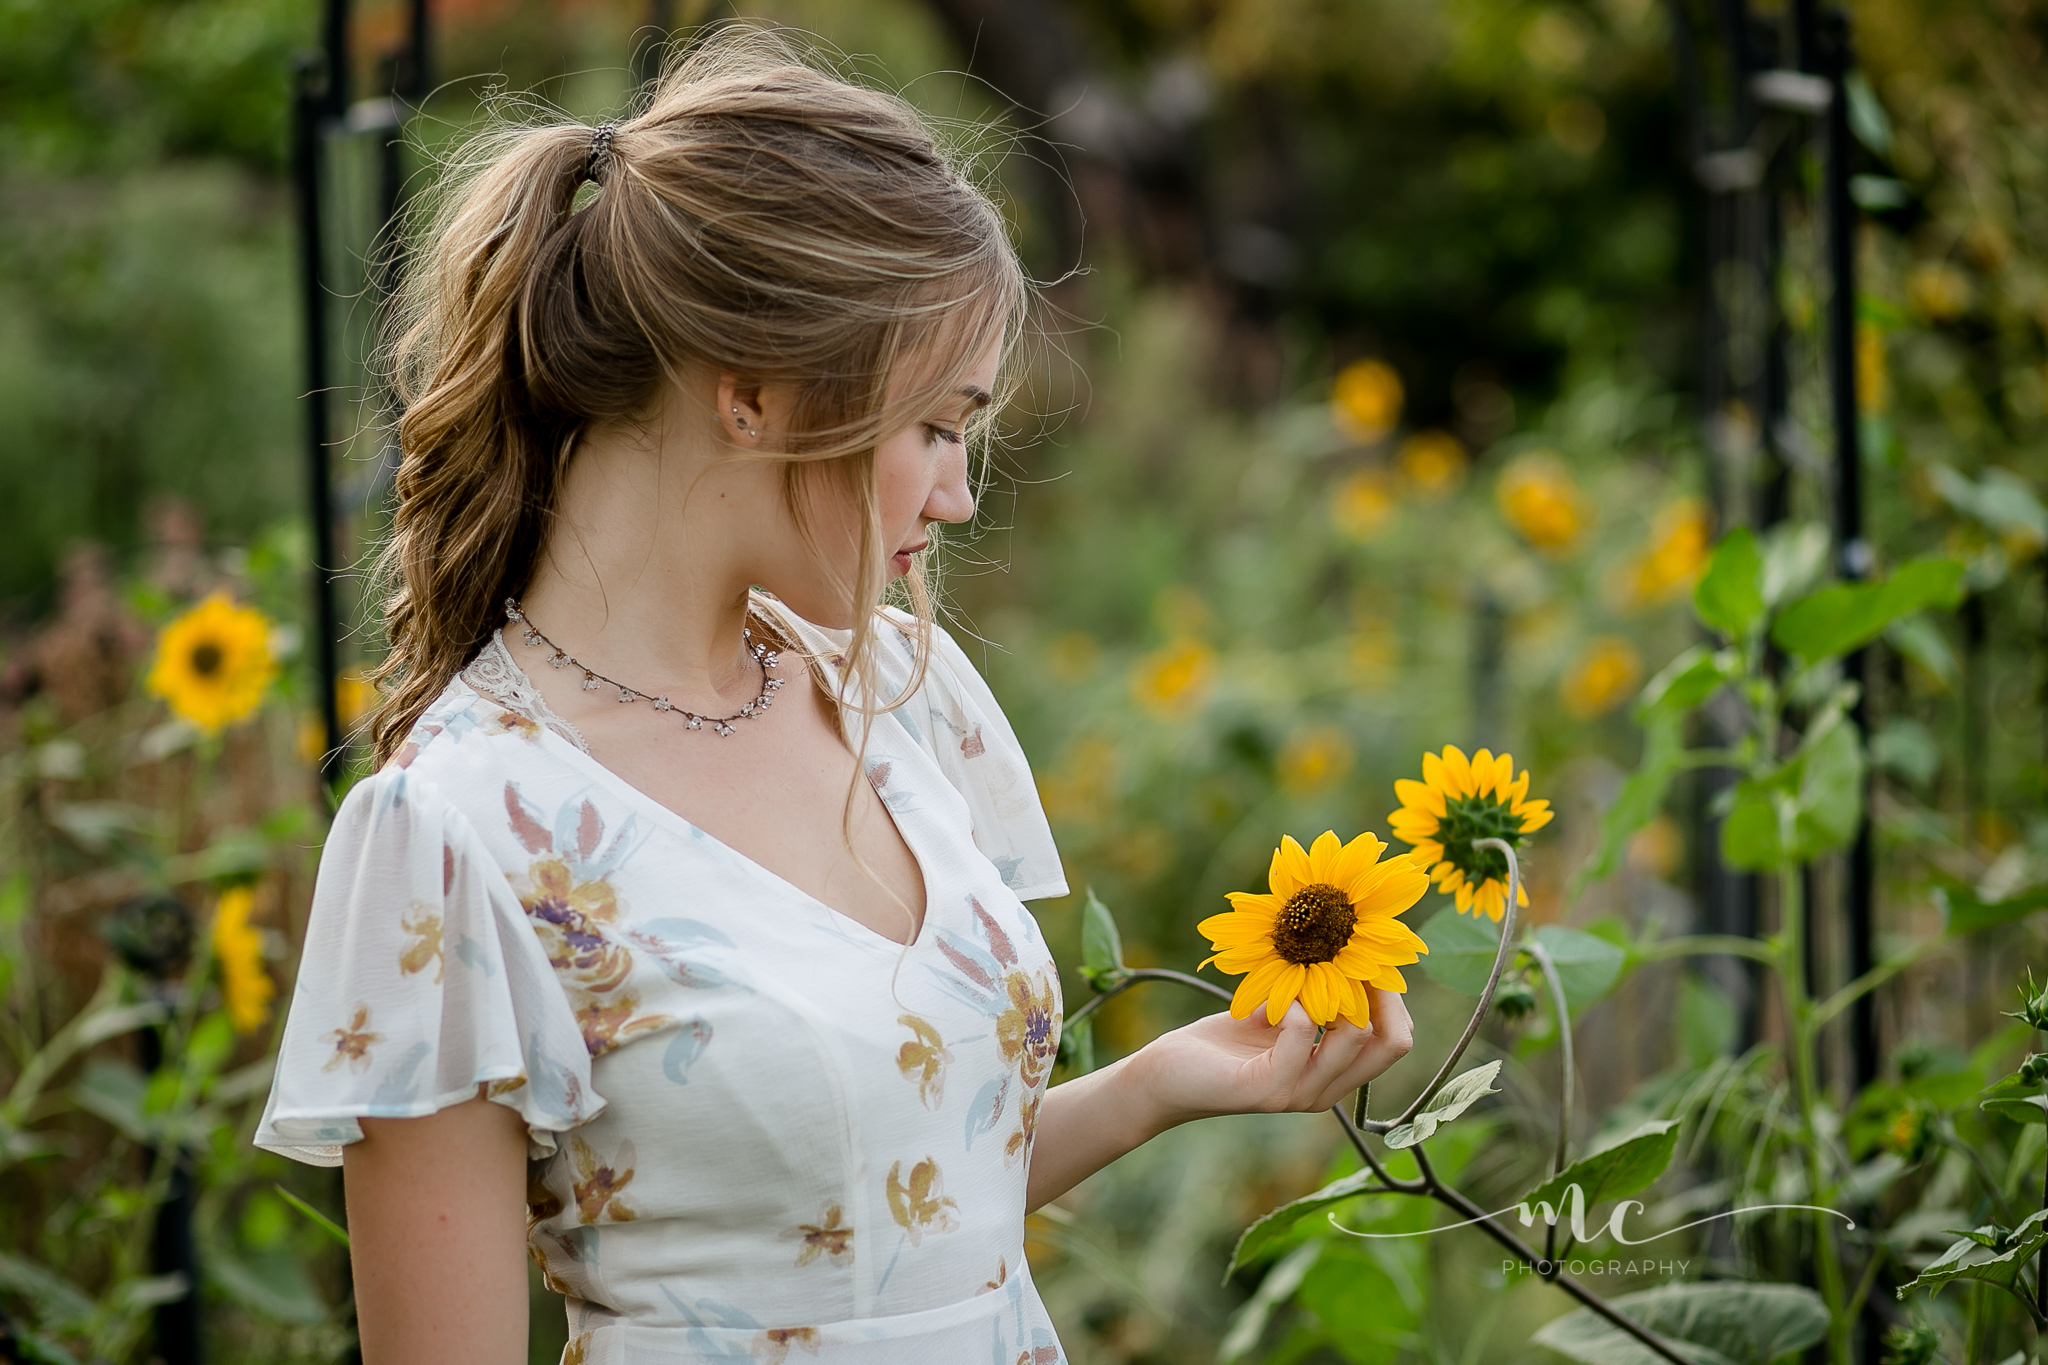  Senior Pictures with sunflowers at West 12 Ranch in Lodi, California 